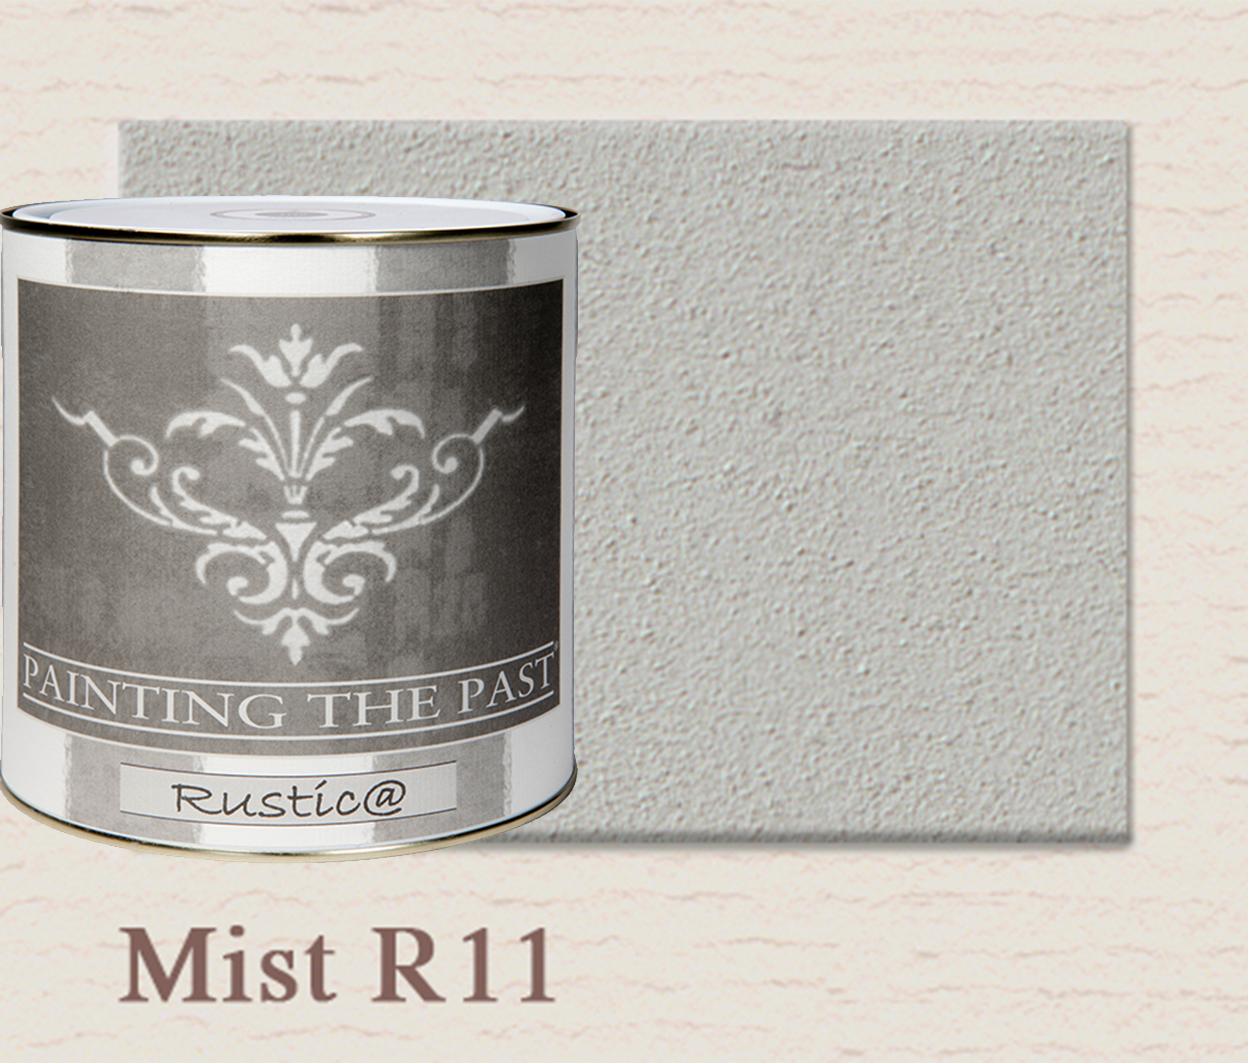 Painting The Past Rustica Mist